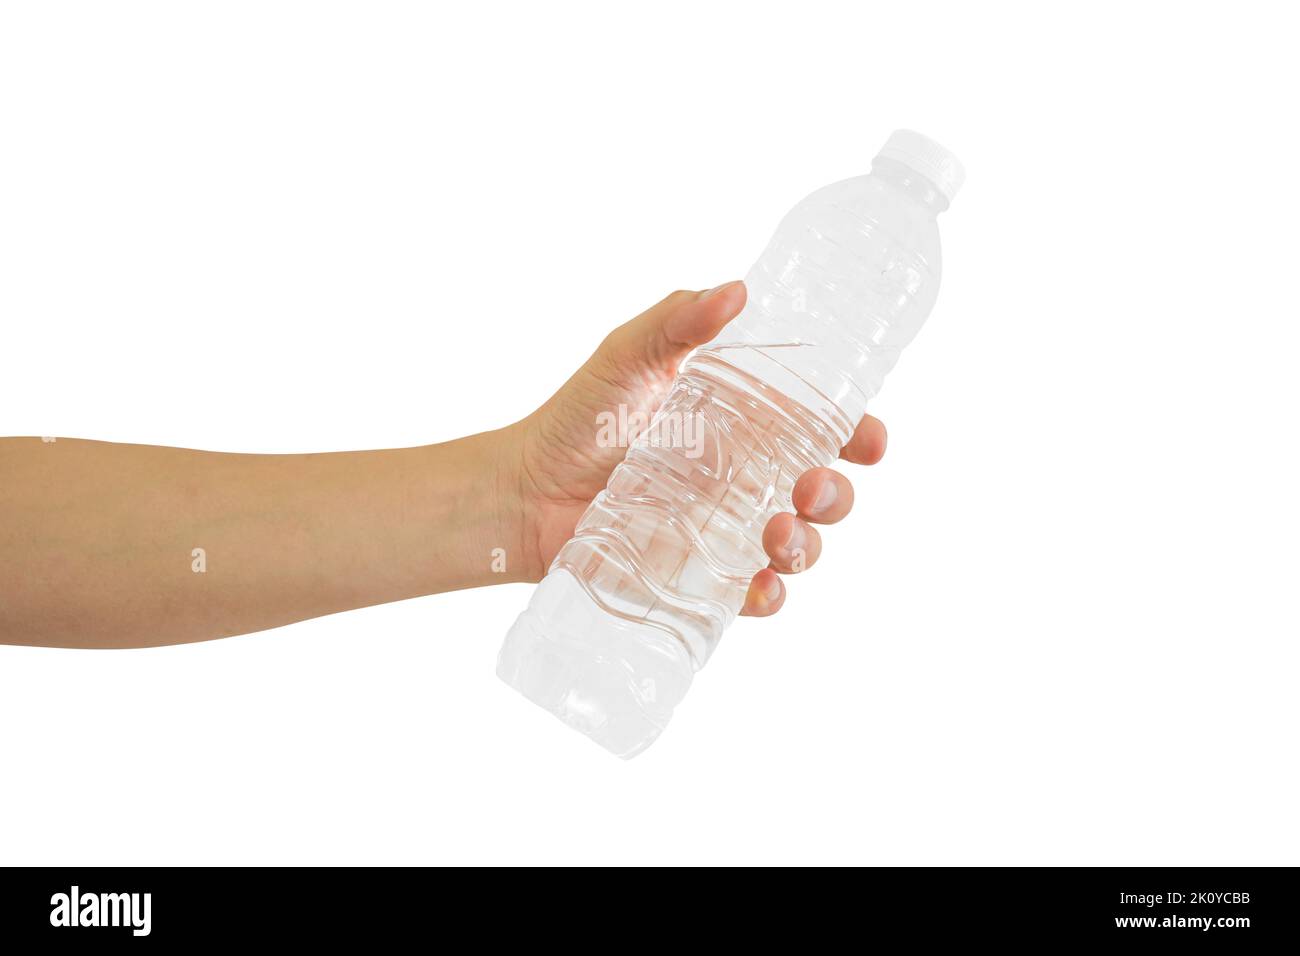 https://c8.alamy.com/comp/2K0YCBB/hand-holding-water-bottle-isolated-on-white-background-include-clipping-path-2K0YCBB.jpg